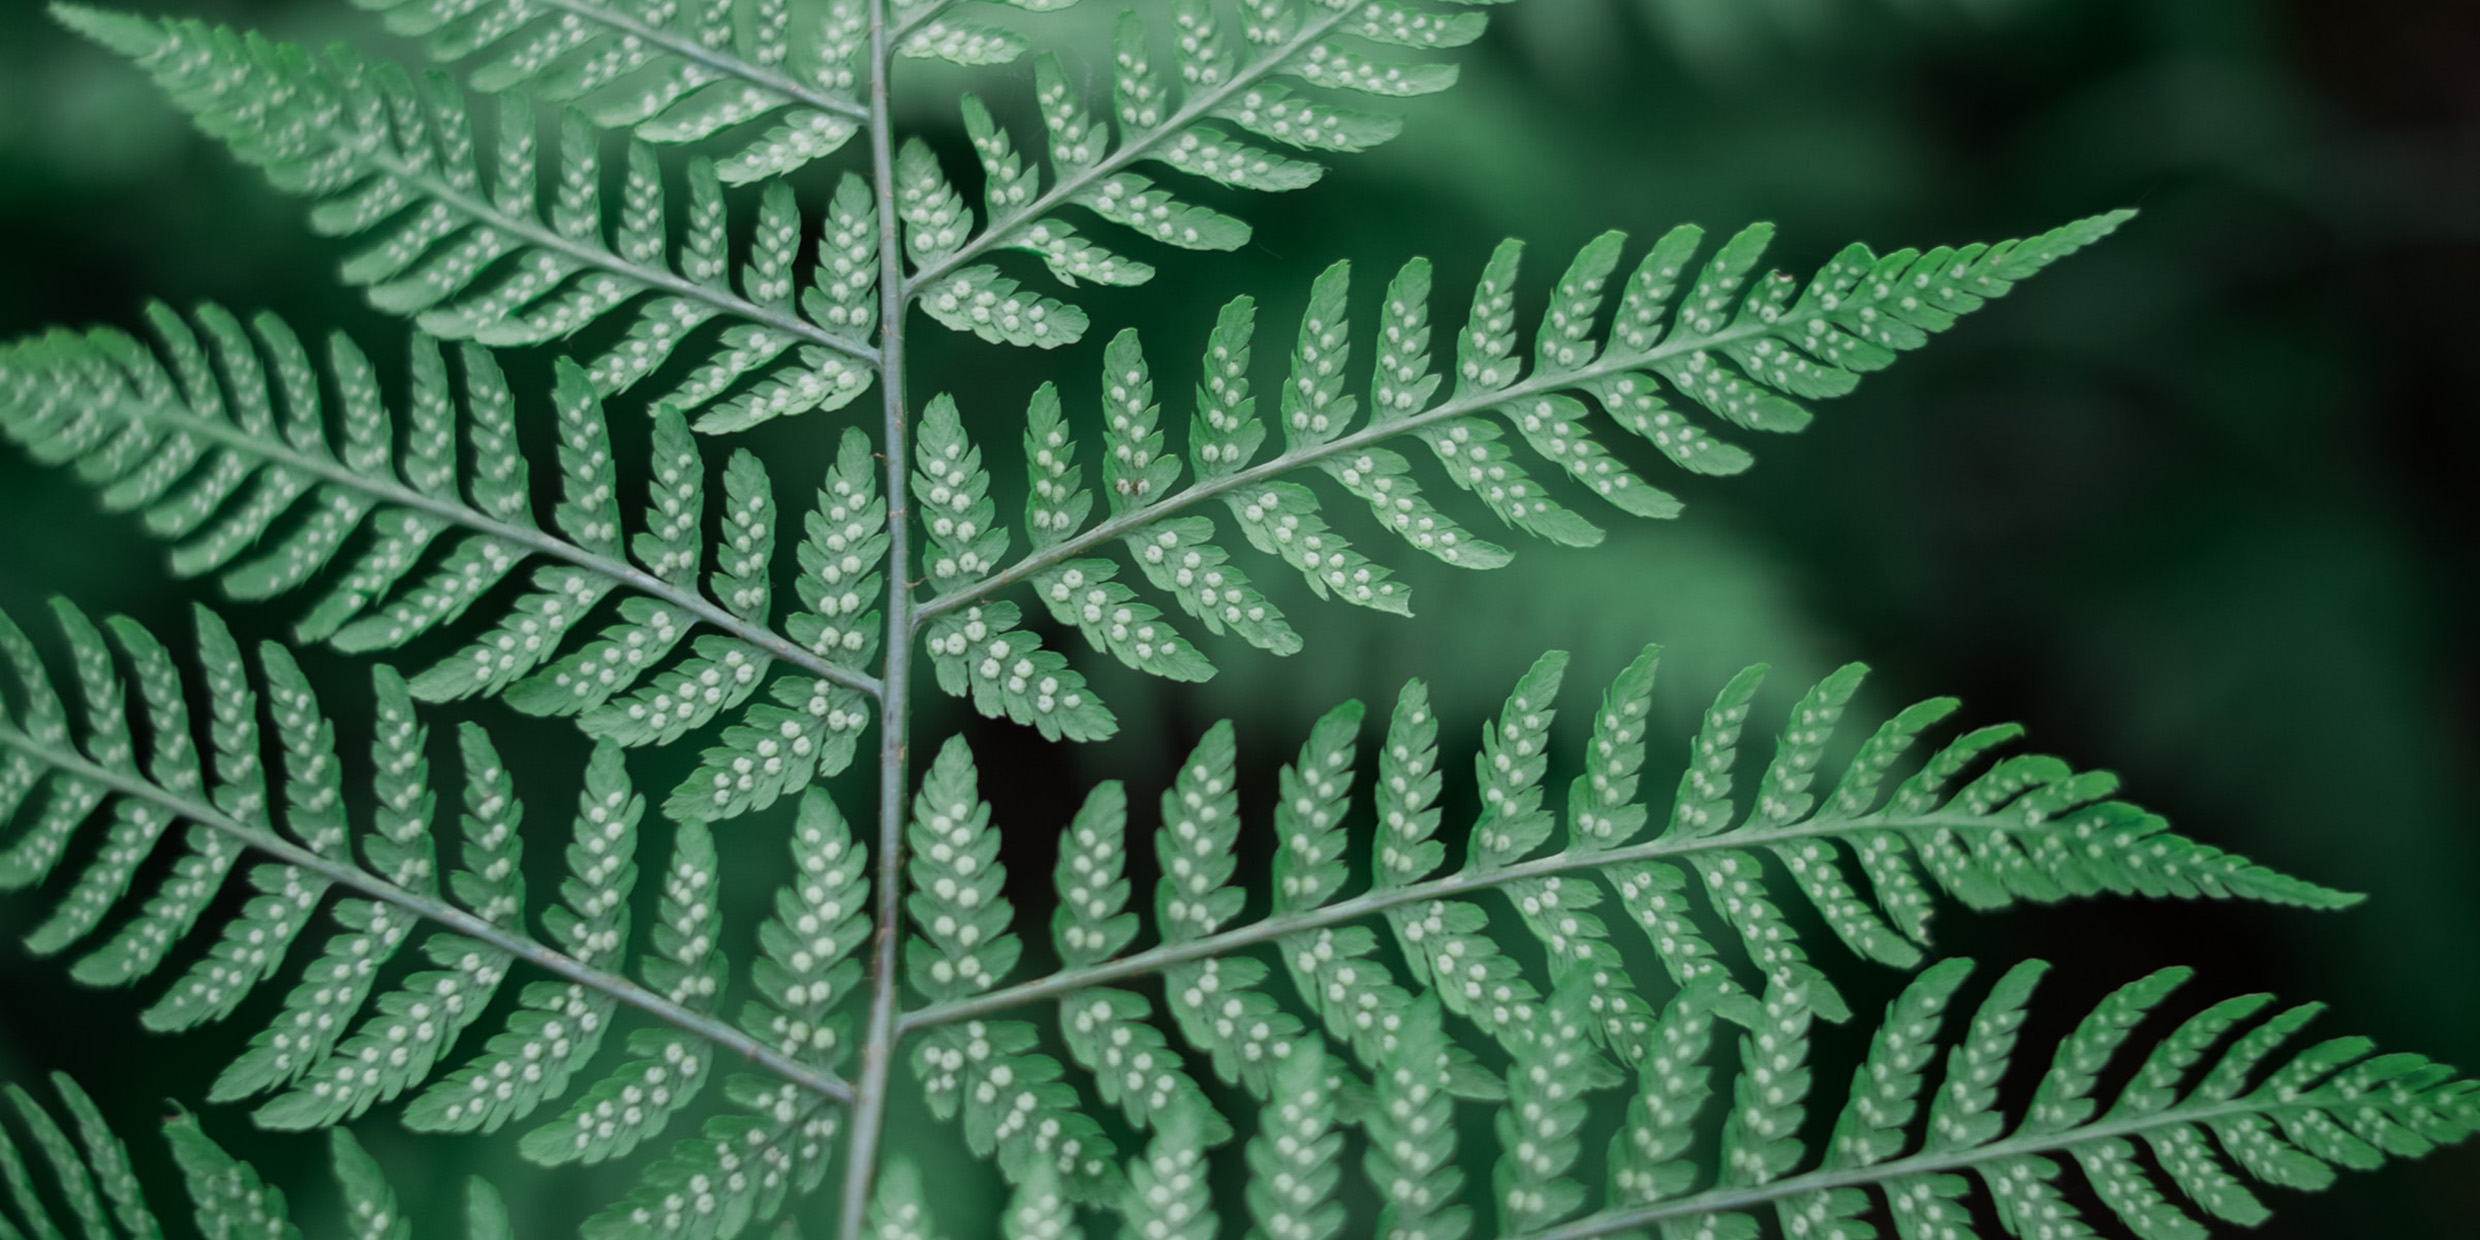 Image of a fern